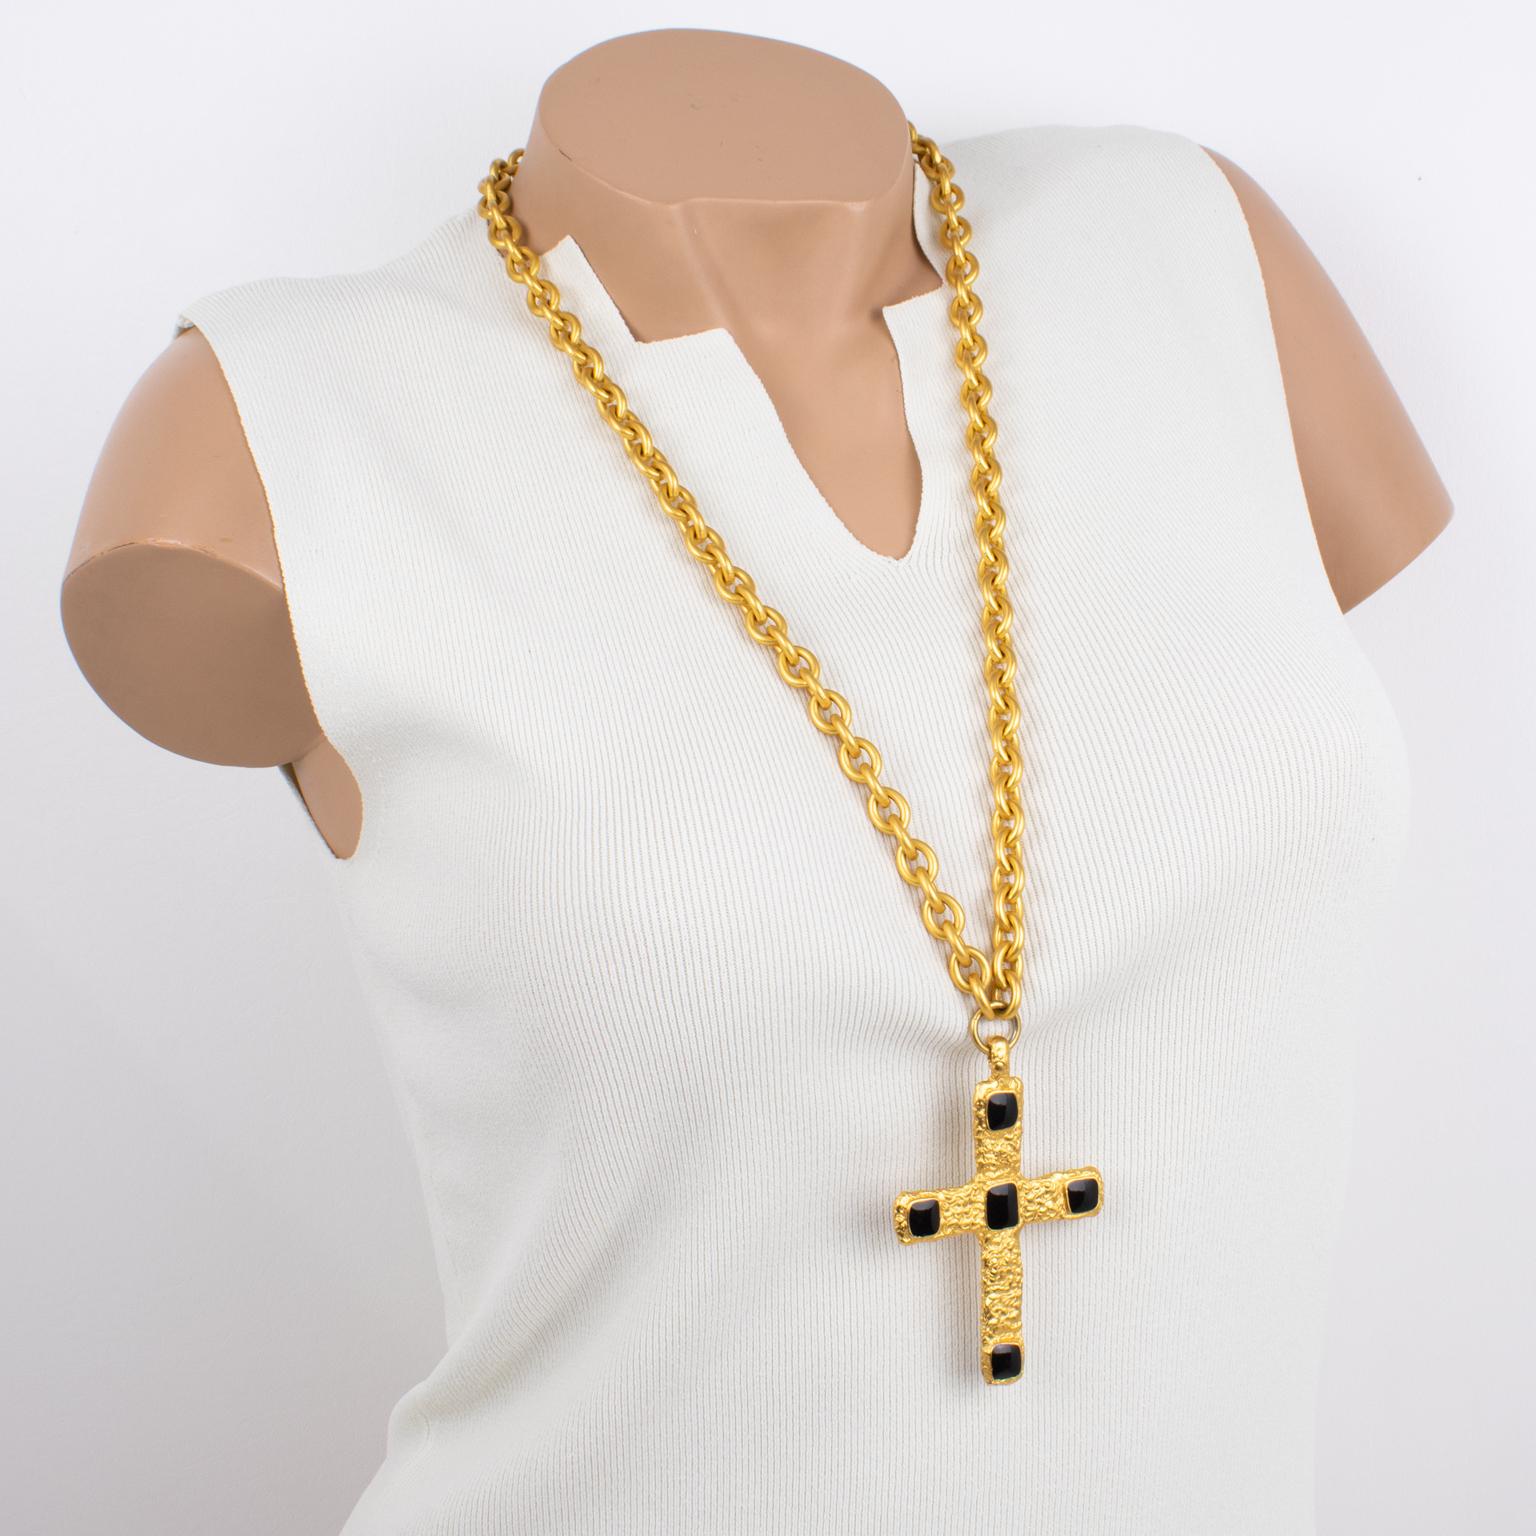 Jean Louis Scherrer Paris designed this lovely, typical 1980s-period pendant necklace. The piece boasts a heavy gilded metal chain with a satin finish ornate with a cross pendant. The modernist cross pendant is textured with a hand-made feel and